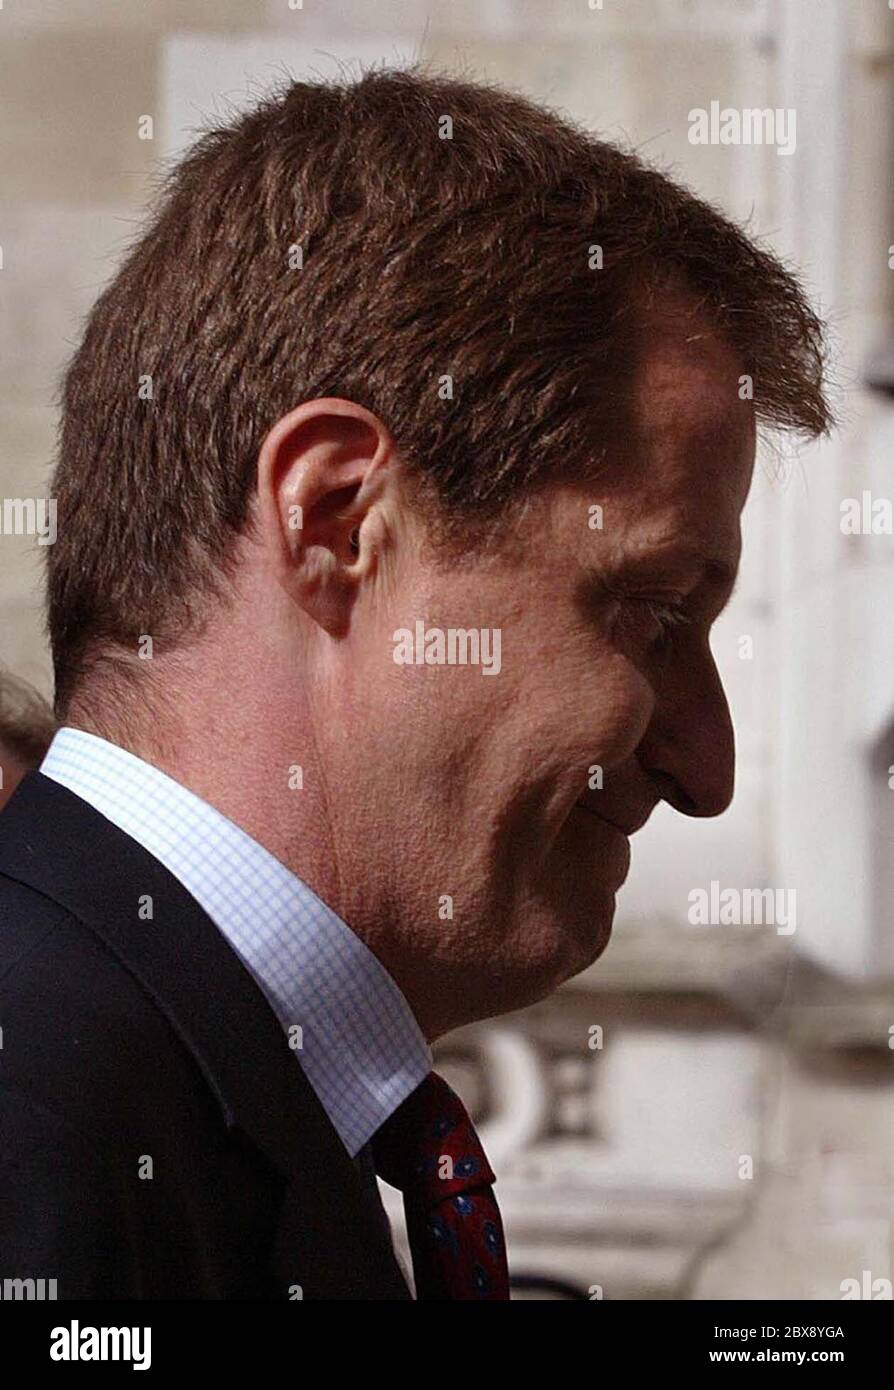 Alistair Campbell, Director of Communications to Britain's Prime Minister Tony Blair, arrives at the Royal Courts of Justice to give evidence to the Hutton Inquiry into the death of government weapons expert Dr David Kelly, in London, August 19, 2003. A potentially explosive inquiry into the suicide of British scientist Kelly will quiz Blair's right-hand man Campbell on Tuesday about the case made for war in Iraq and the scientist's death. Picture : James Boardman Press Photography. Stock Photo